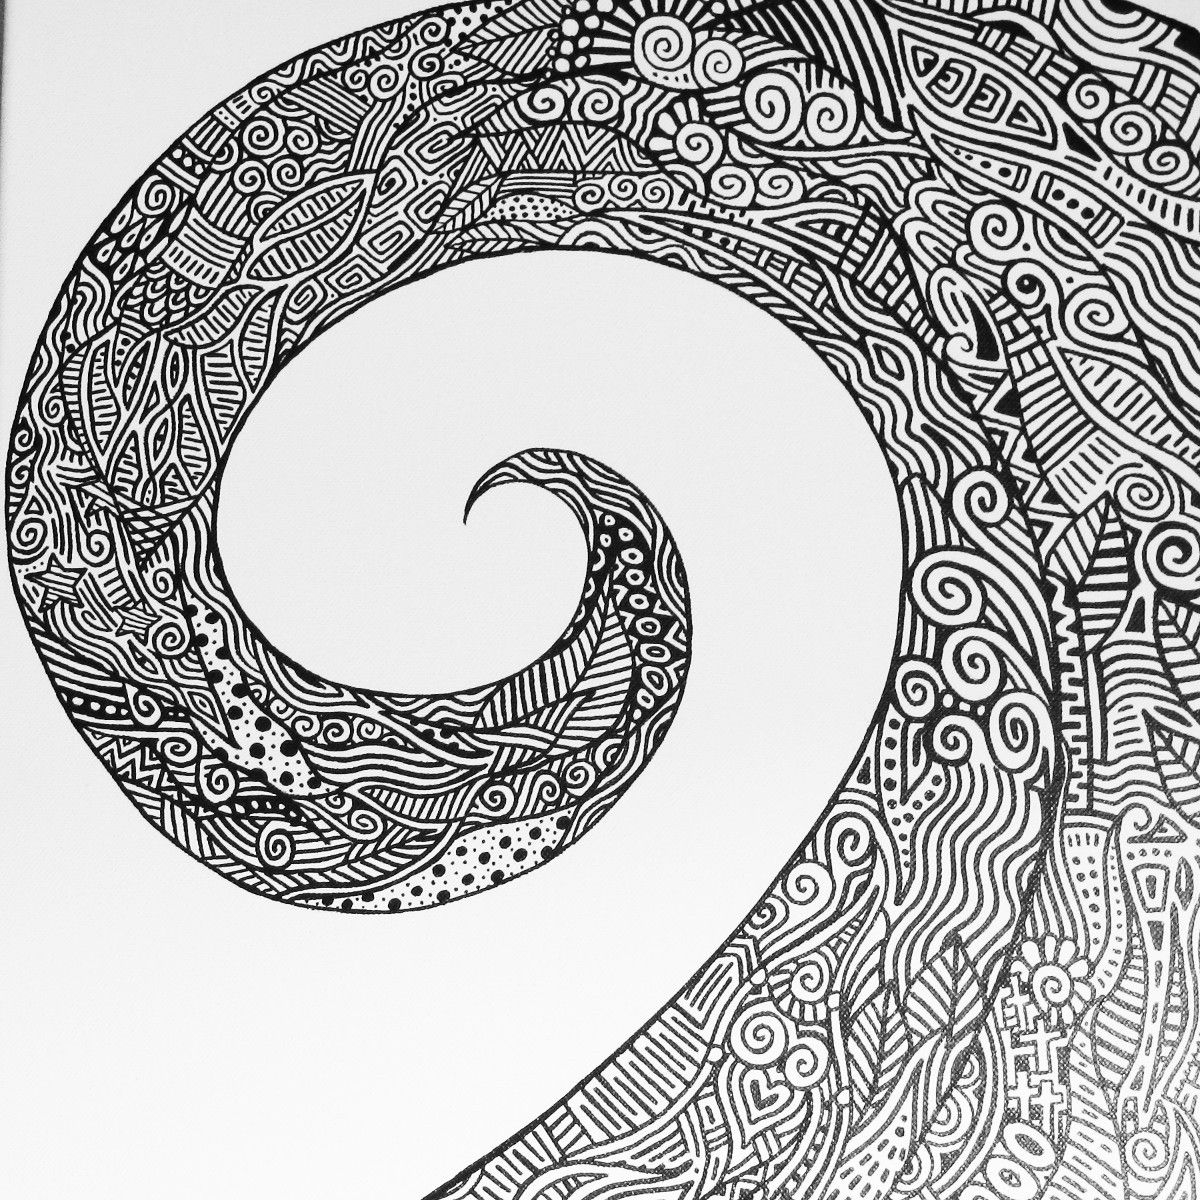 Coloringgggg | Coloring Pages, Paisley Design and ...